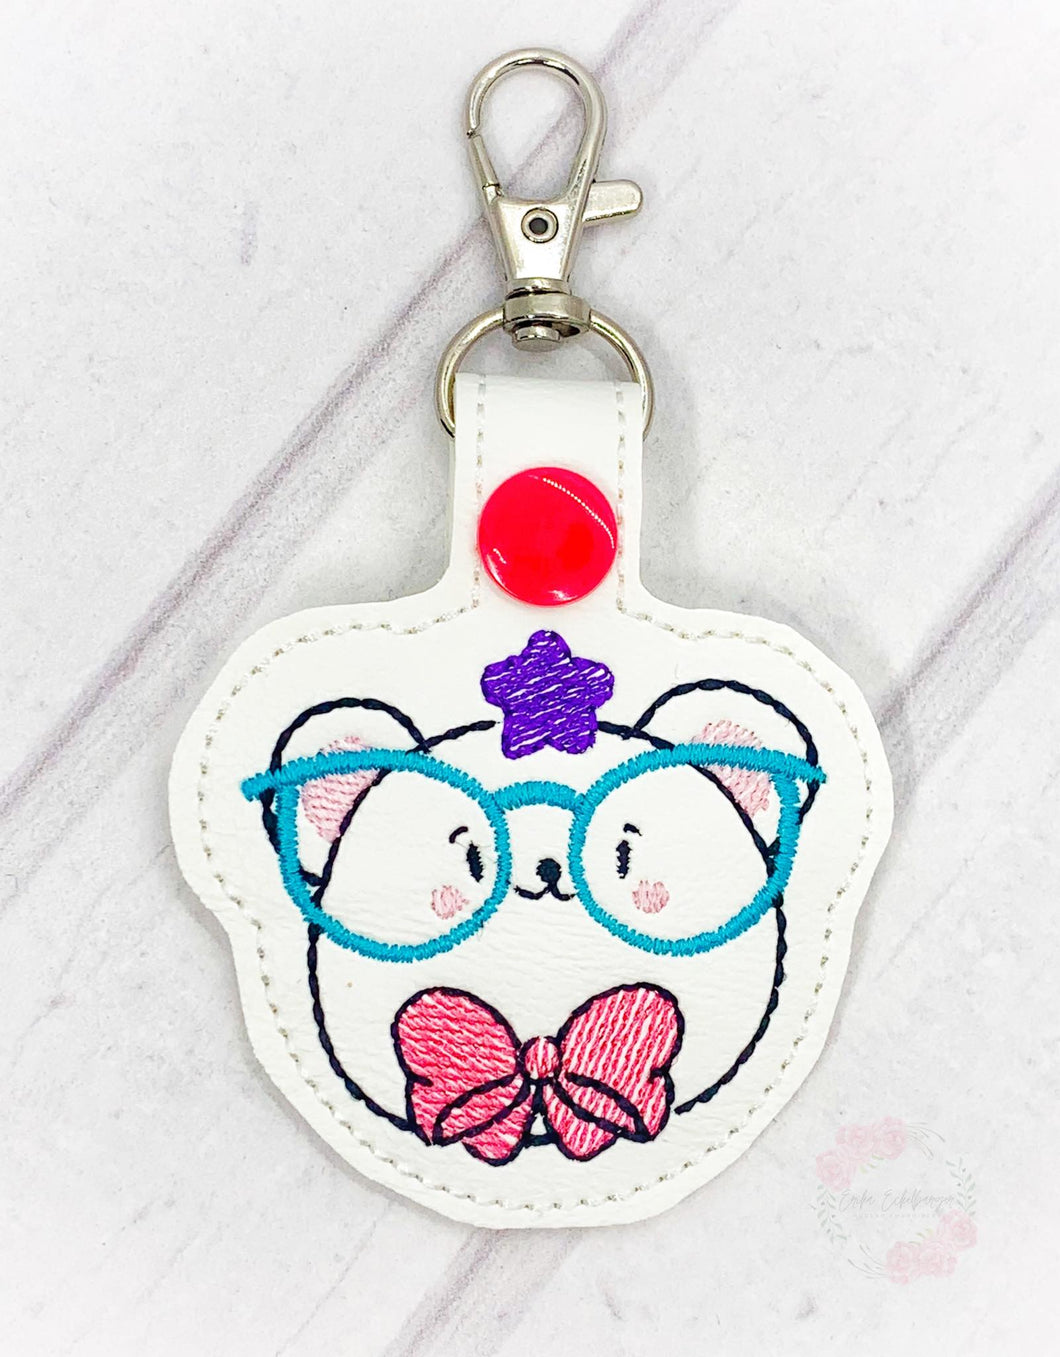 Glasses Bear Snap tab (single and multi file included) machine embroidery design DIGITAL DOWNLOAD